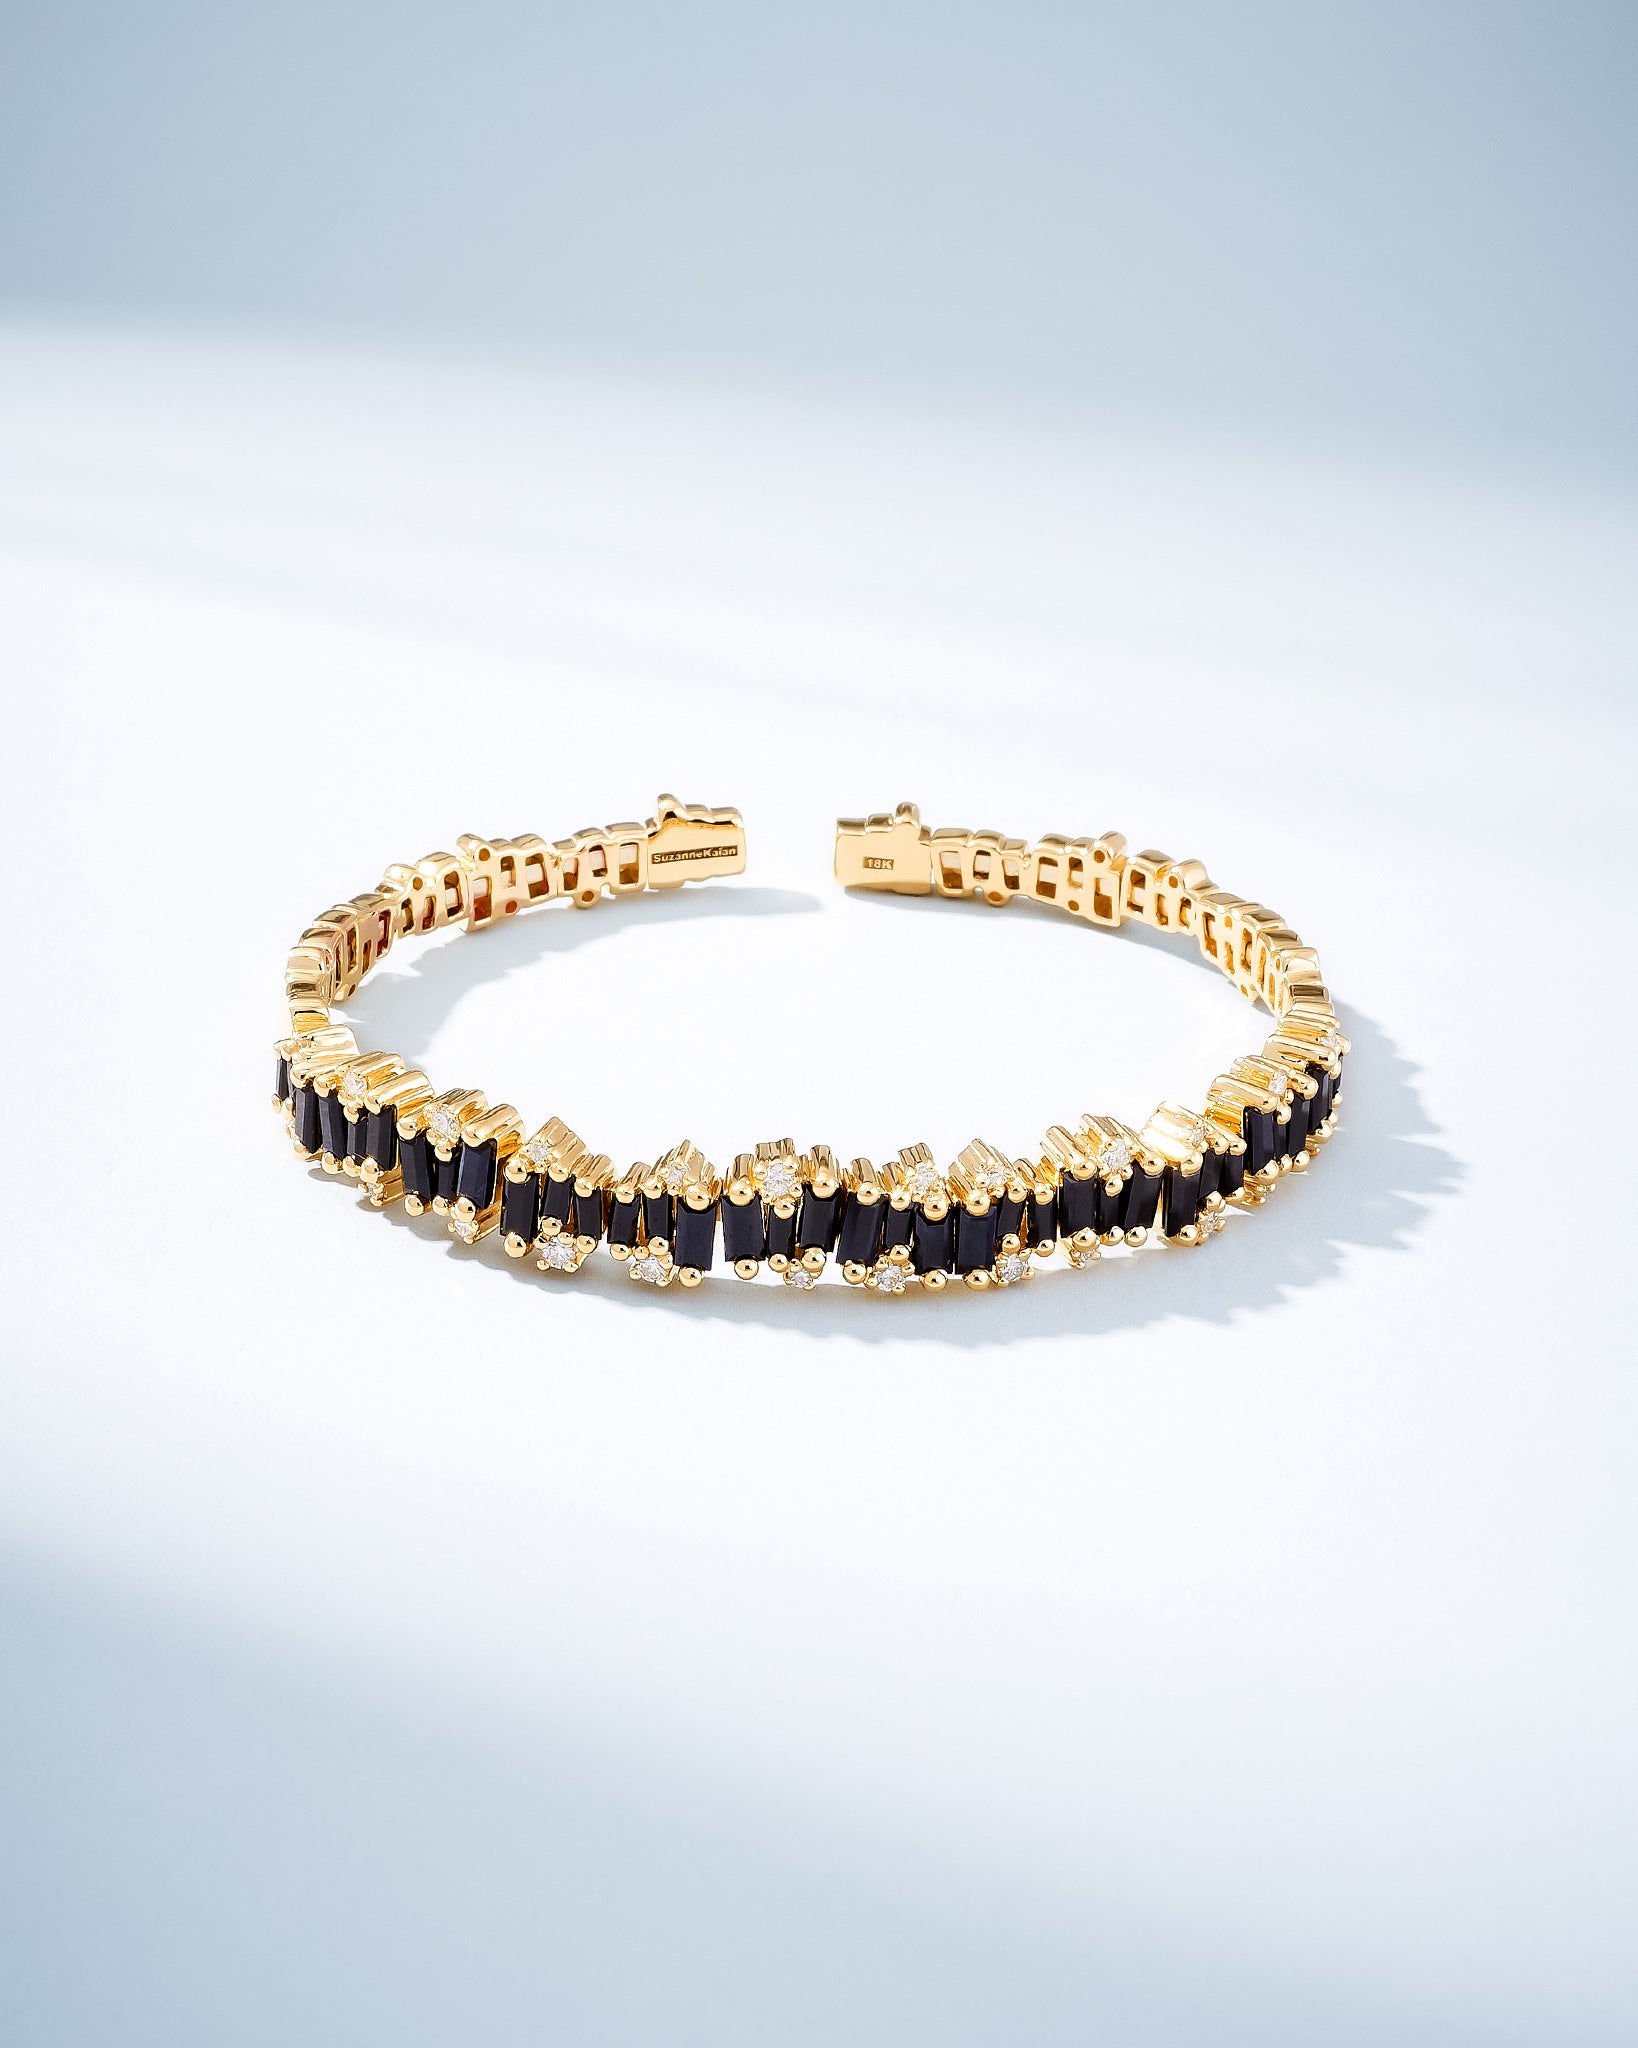 Suzanne Kalan Shimmer Audrey Black Sapphire Bangle in 18k yellow gold